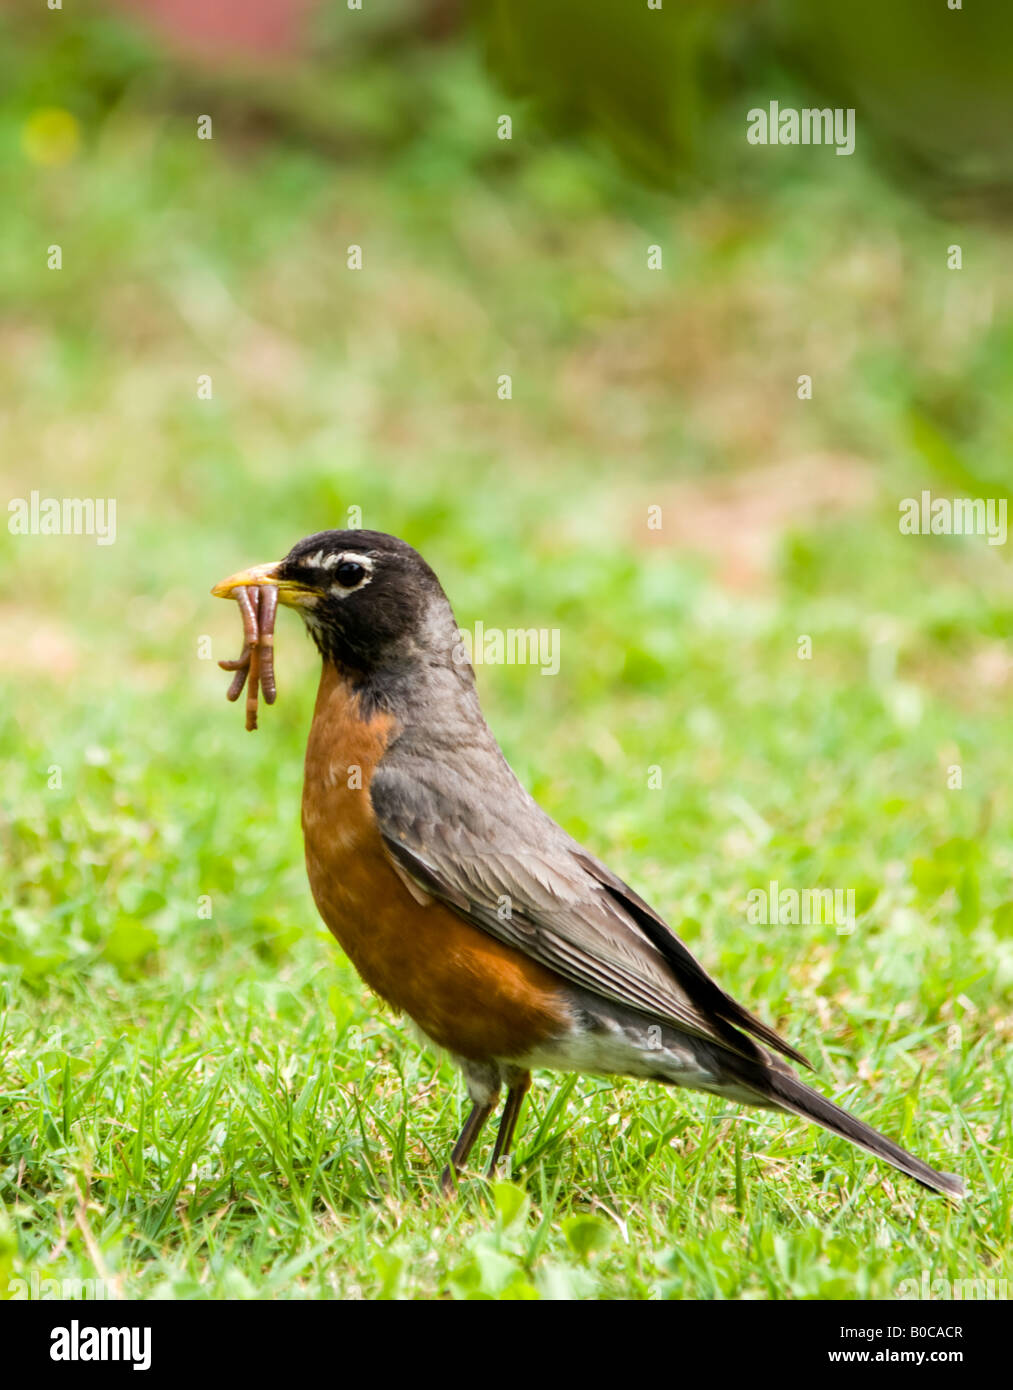 robin eating worms in dirt